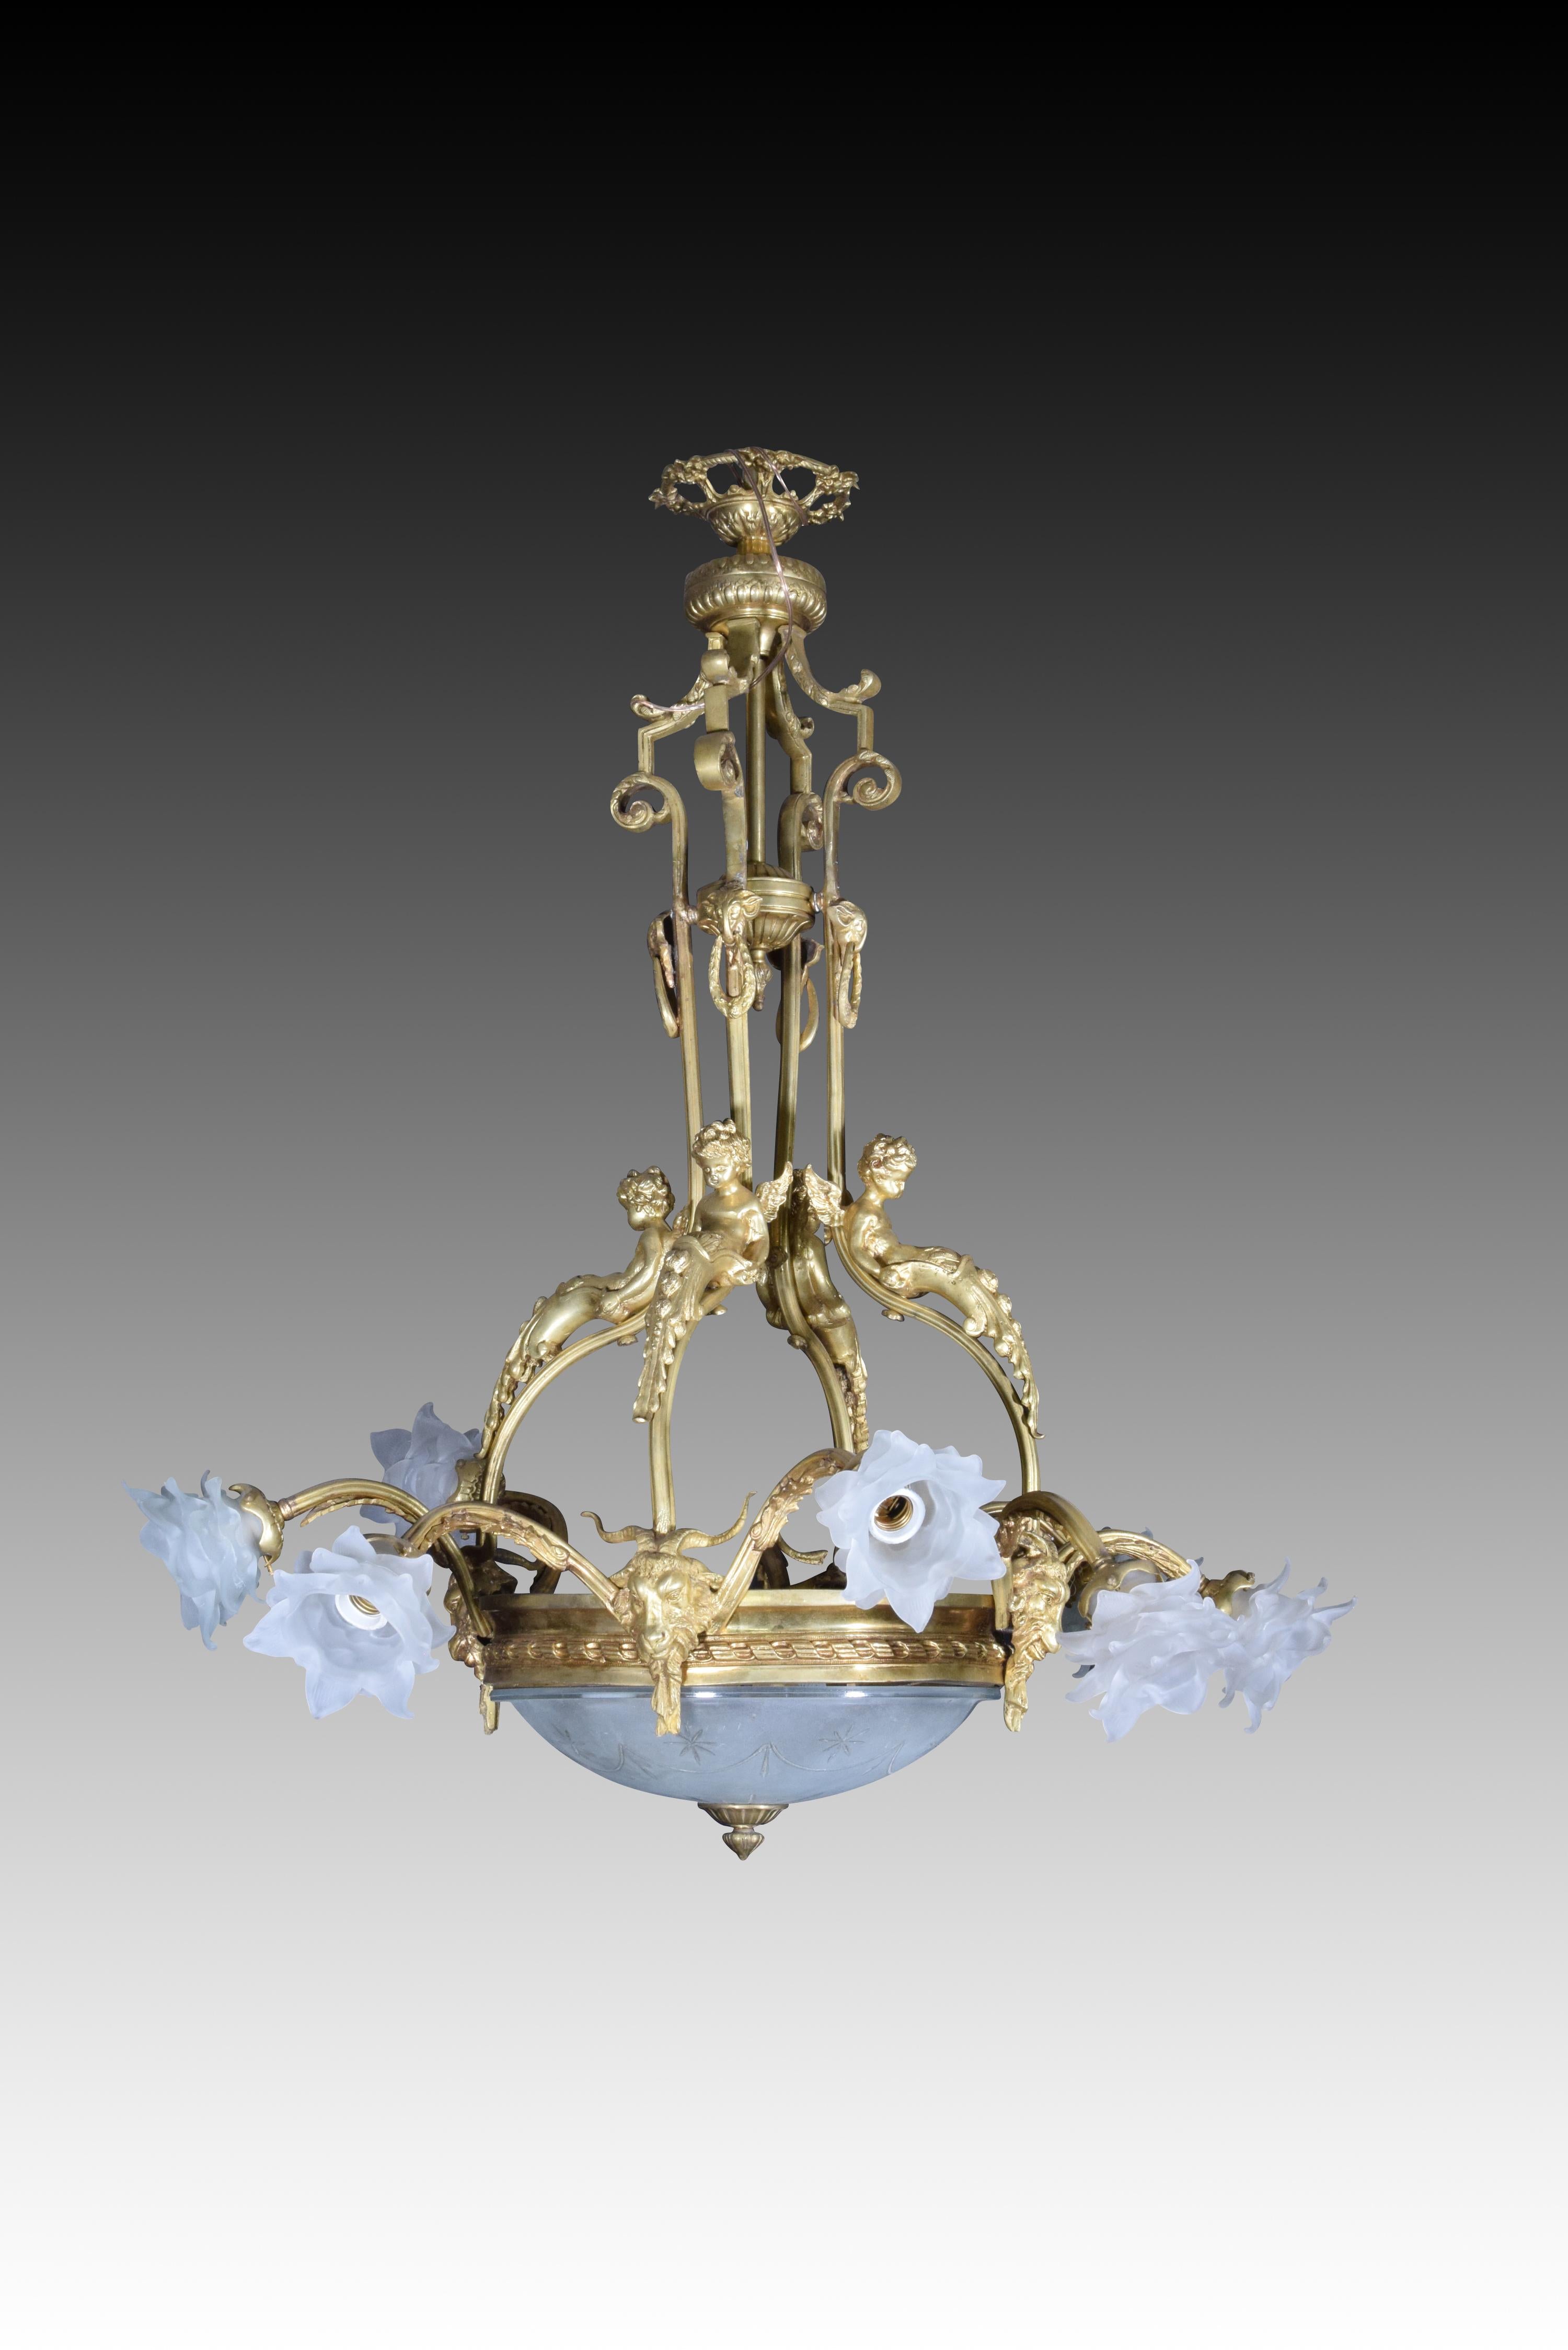 Lamp. Bronze, glass.
 Classical style ceiling lamp that has a central glass ceiling edged in bronze and with ram heads, from which two arms emerge ending in glass tulips in the shape of a flower. The connection to the ceiling is made using bronze